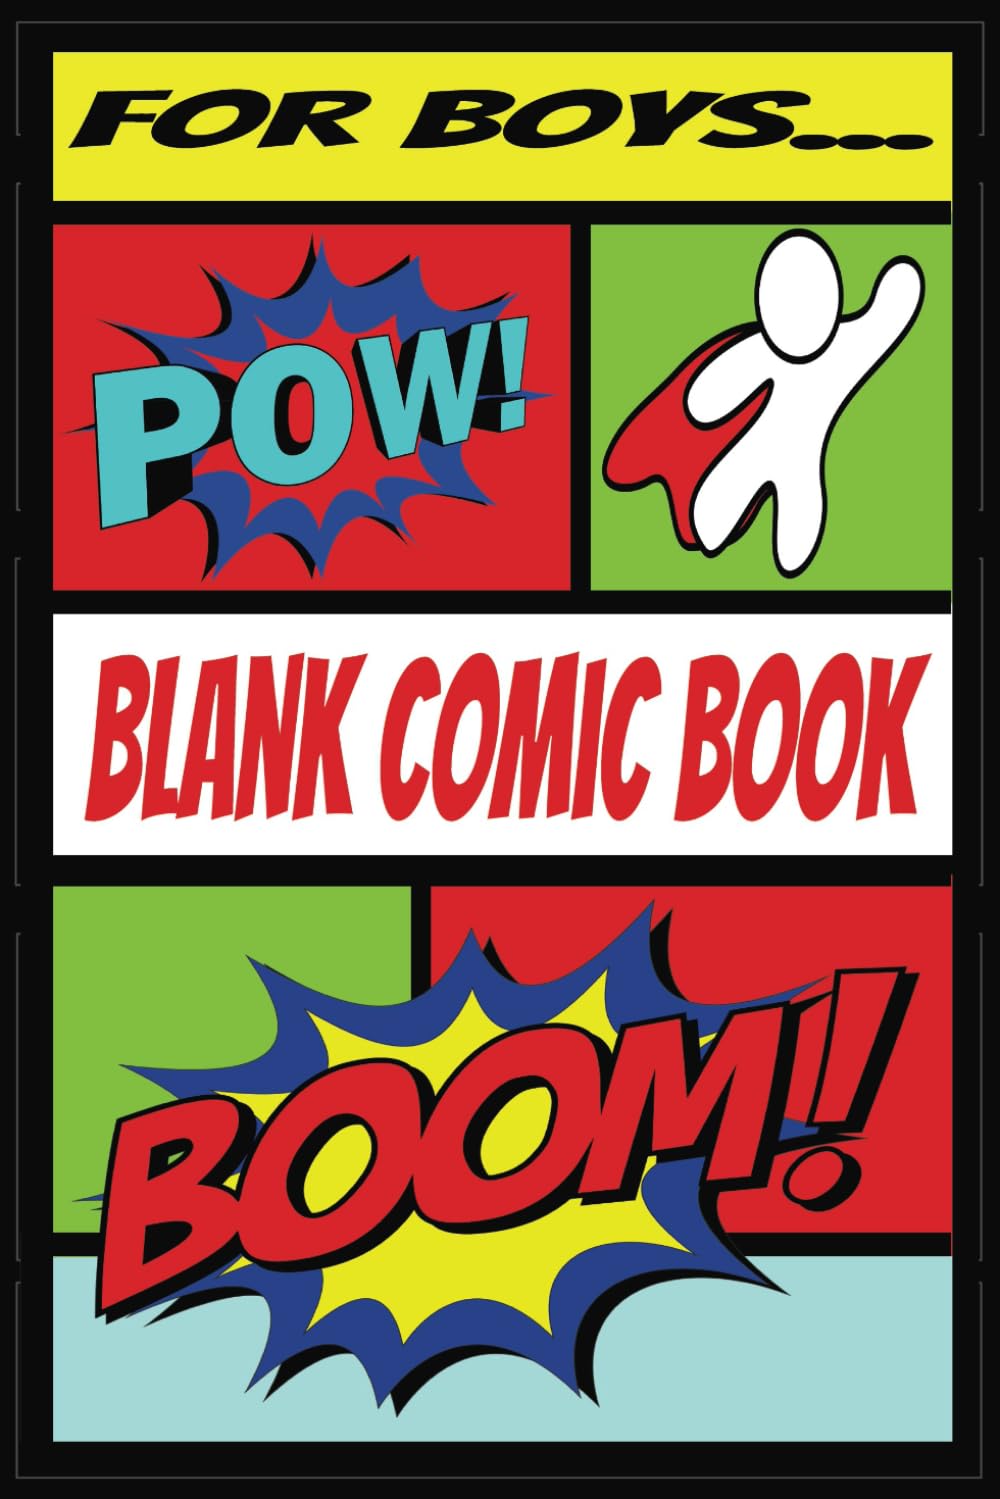 For Boys - Blank Comic Book: Create Your Own Comics, 122 Pages, Multiple Templates, Medium Size at 6